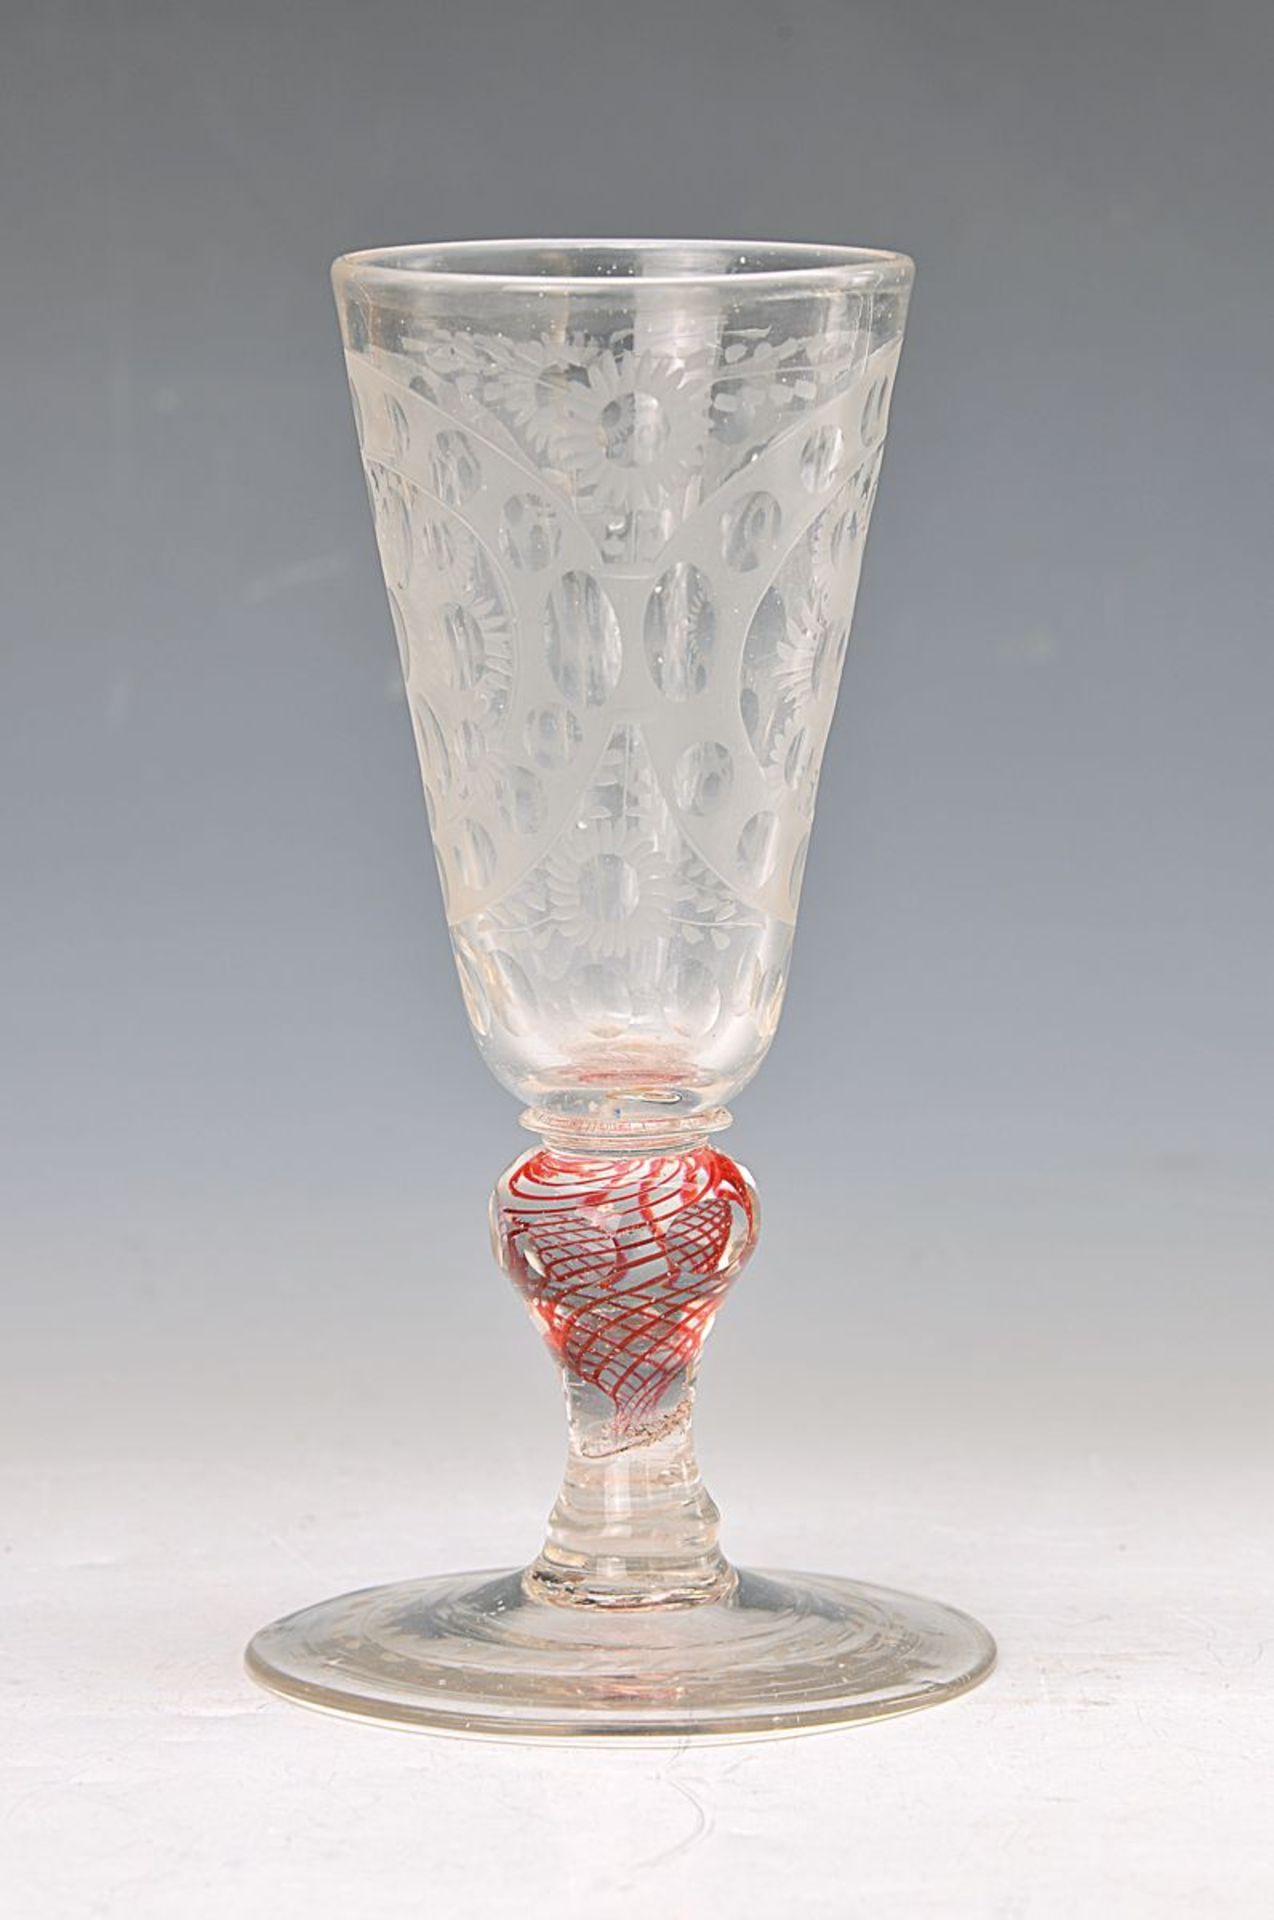 goblet, Bohemia, around 1700, colorless blown glass with two grounded circles of double lentil-cut